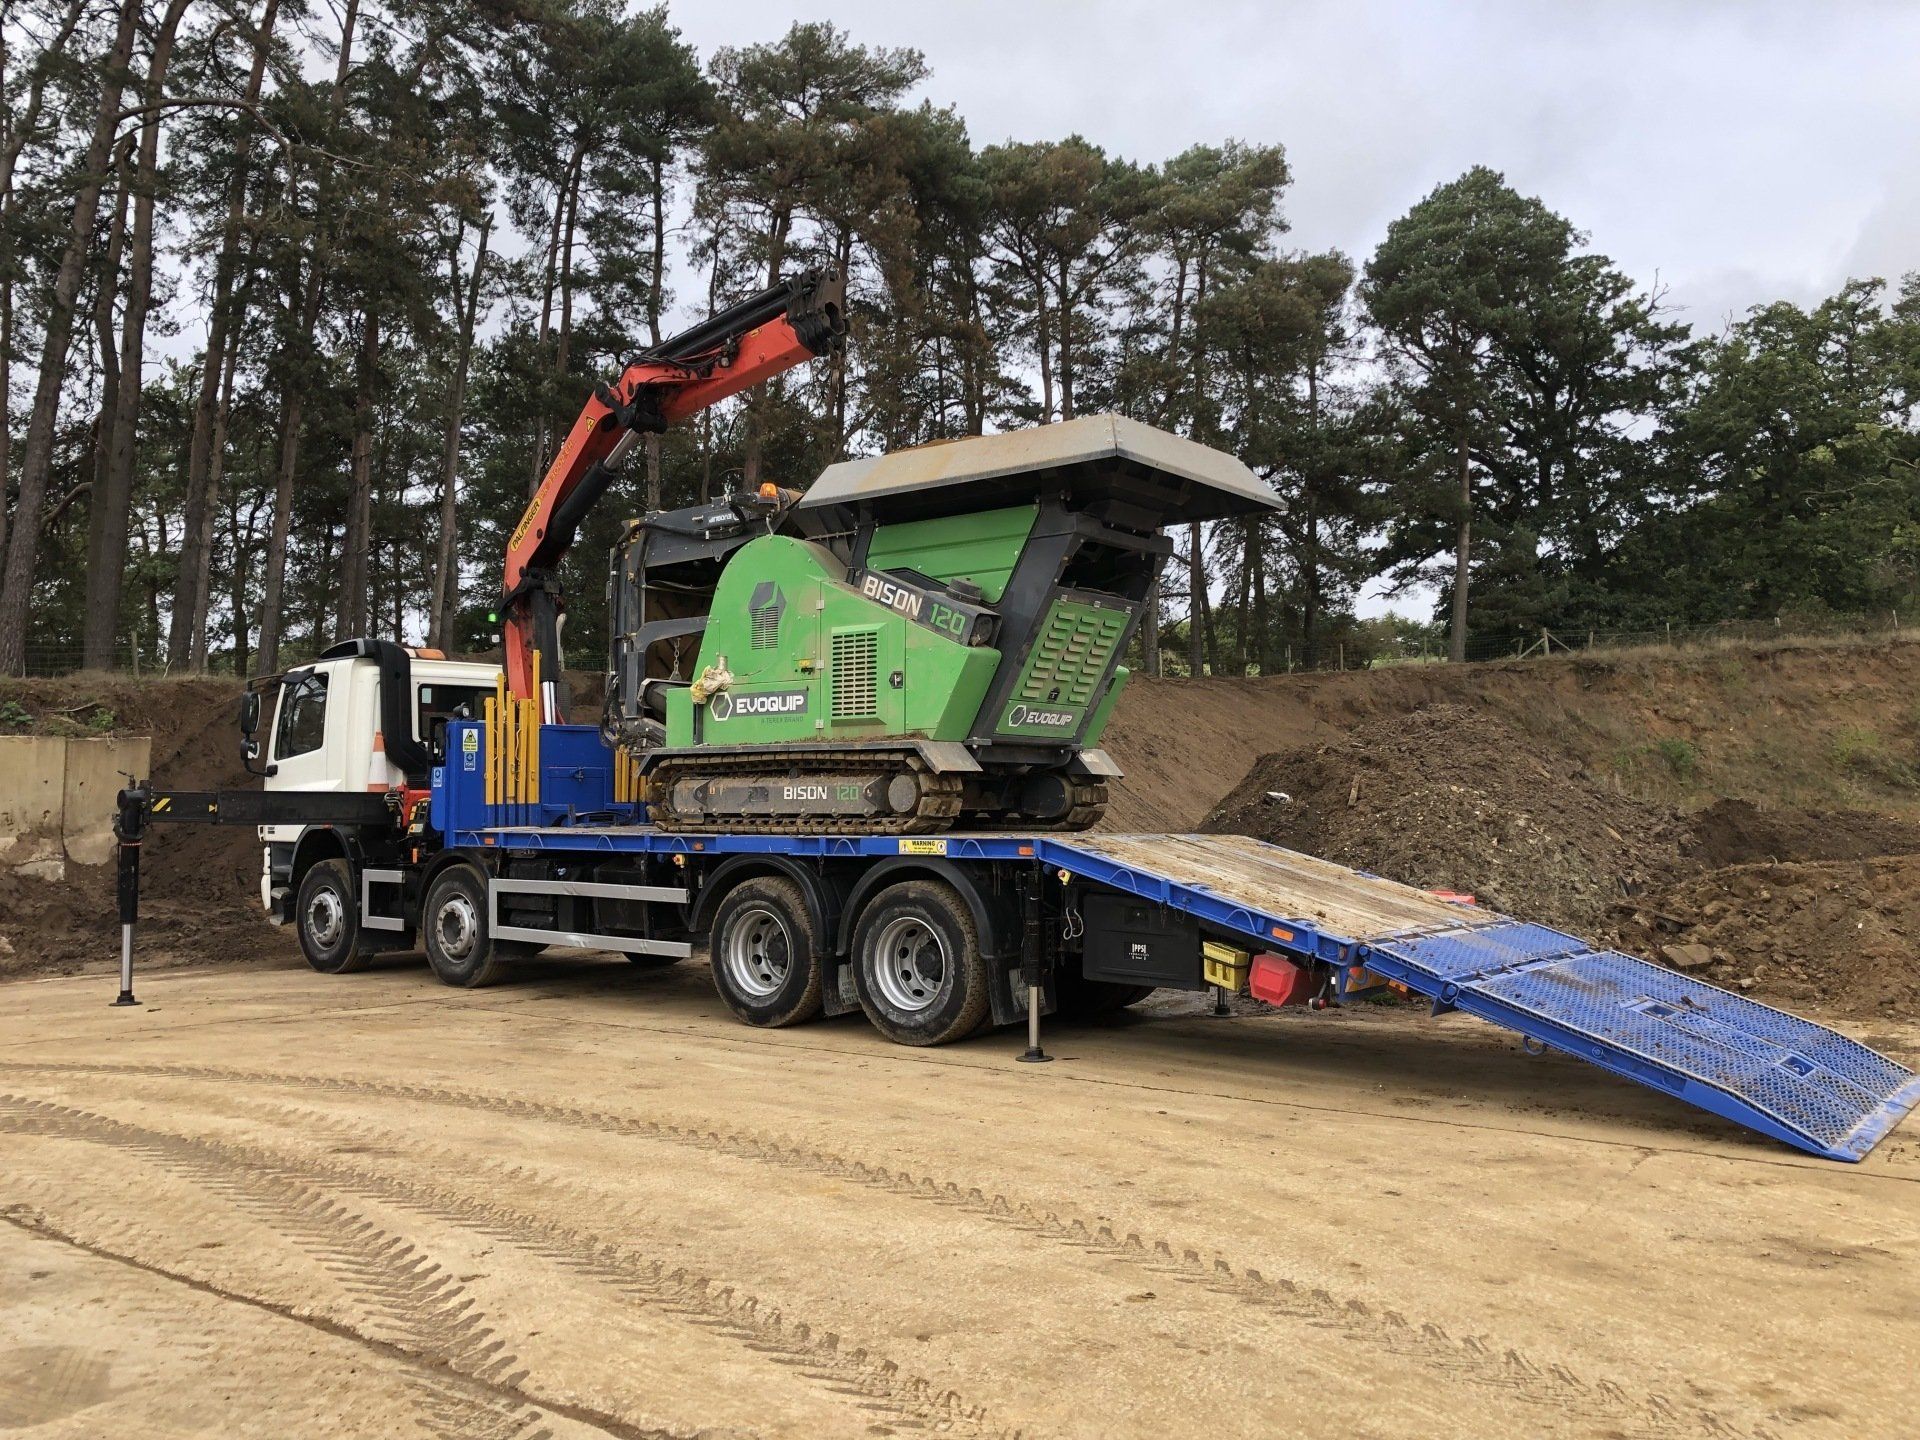 Crusher being delivered onsite